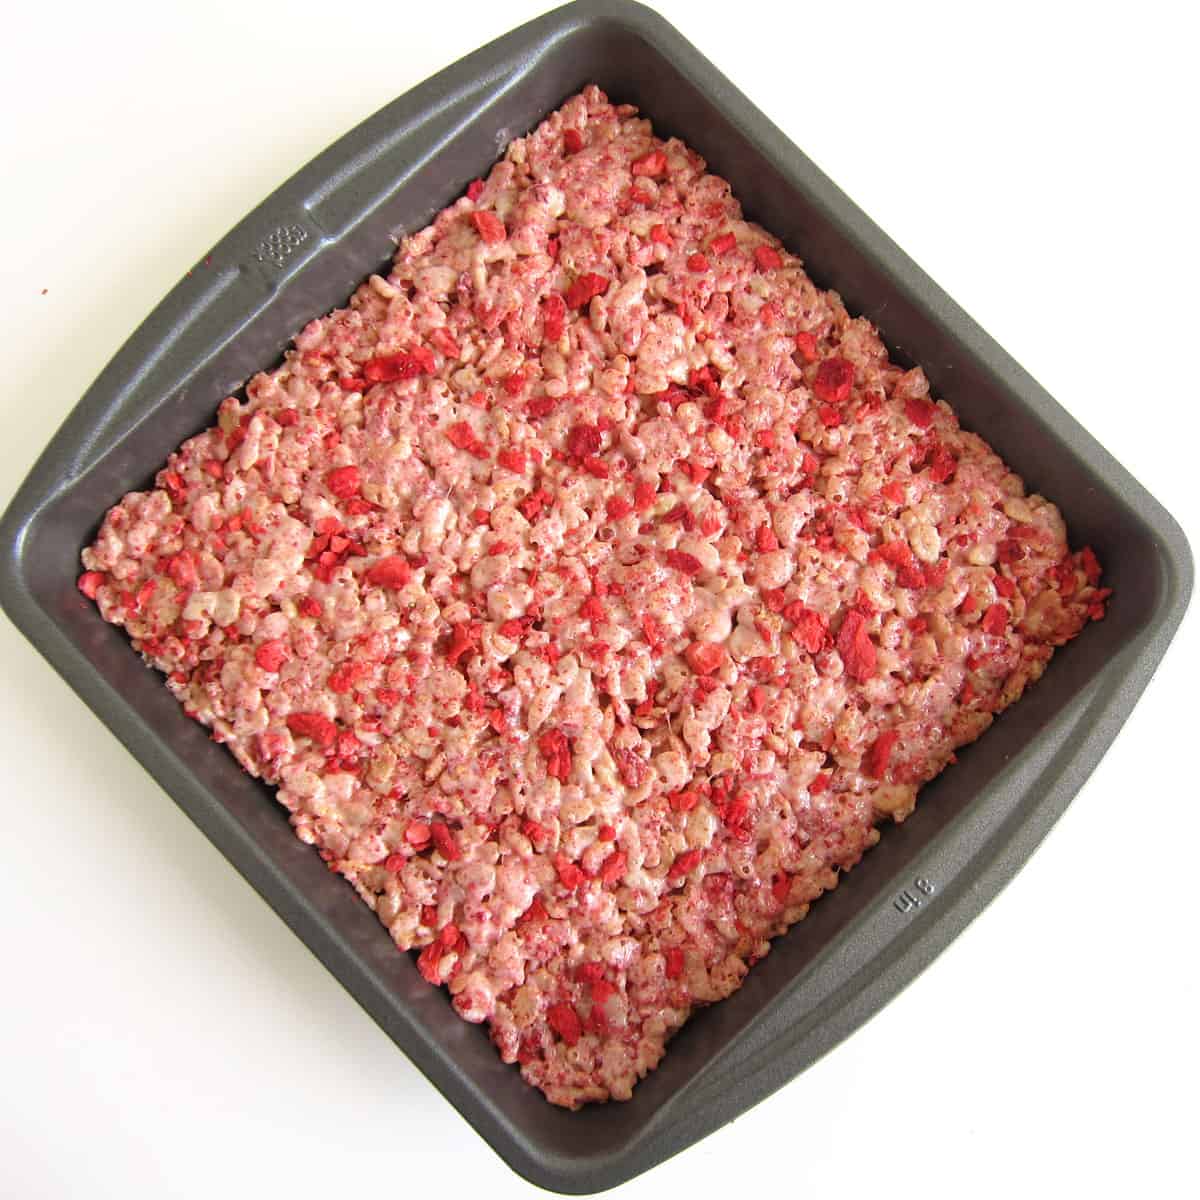 8-inch non-stick pan filled with strawberry crispy treats topped with crushed freeze dried strawberries